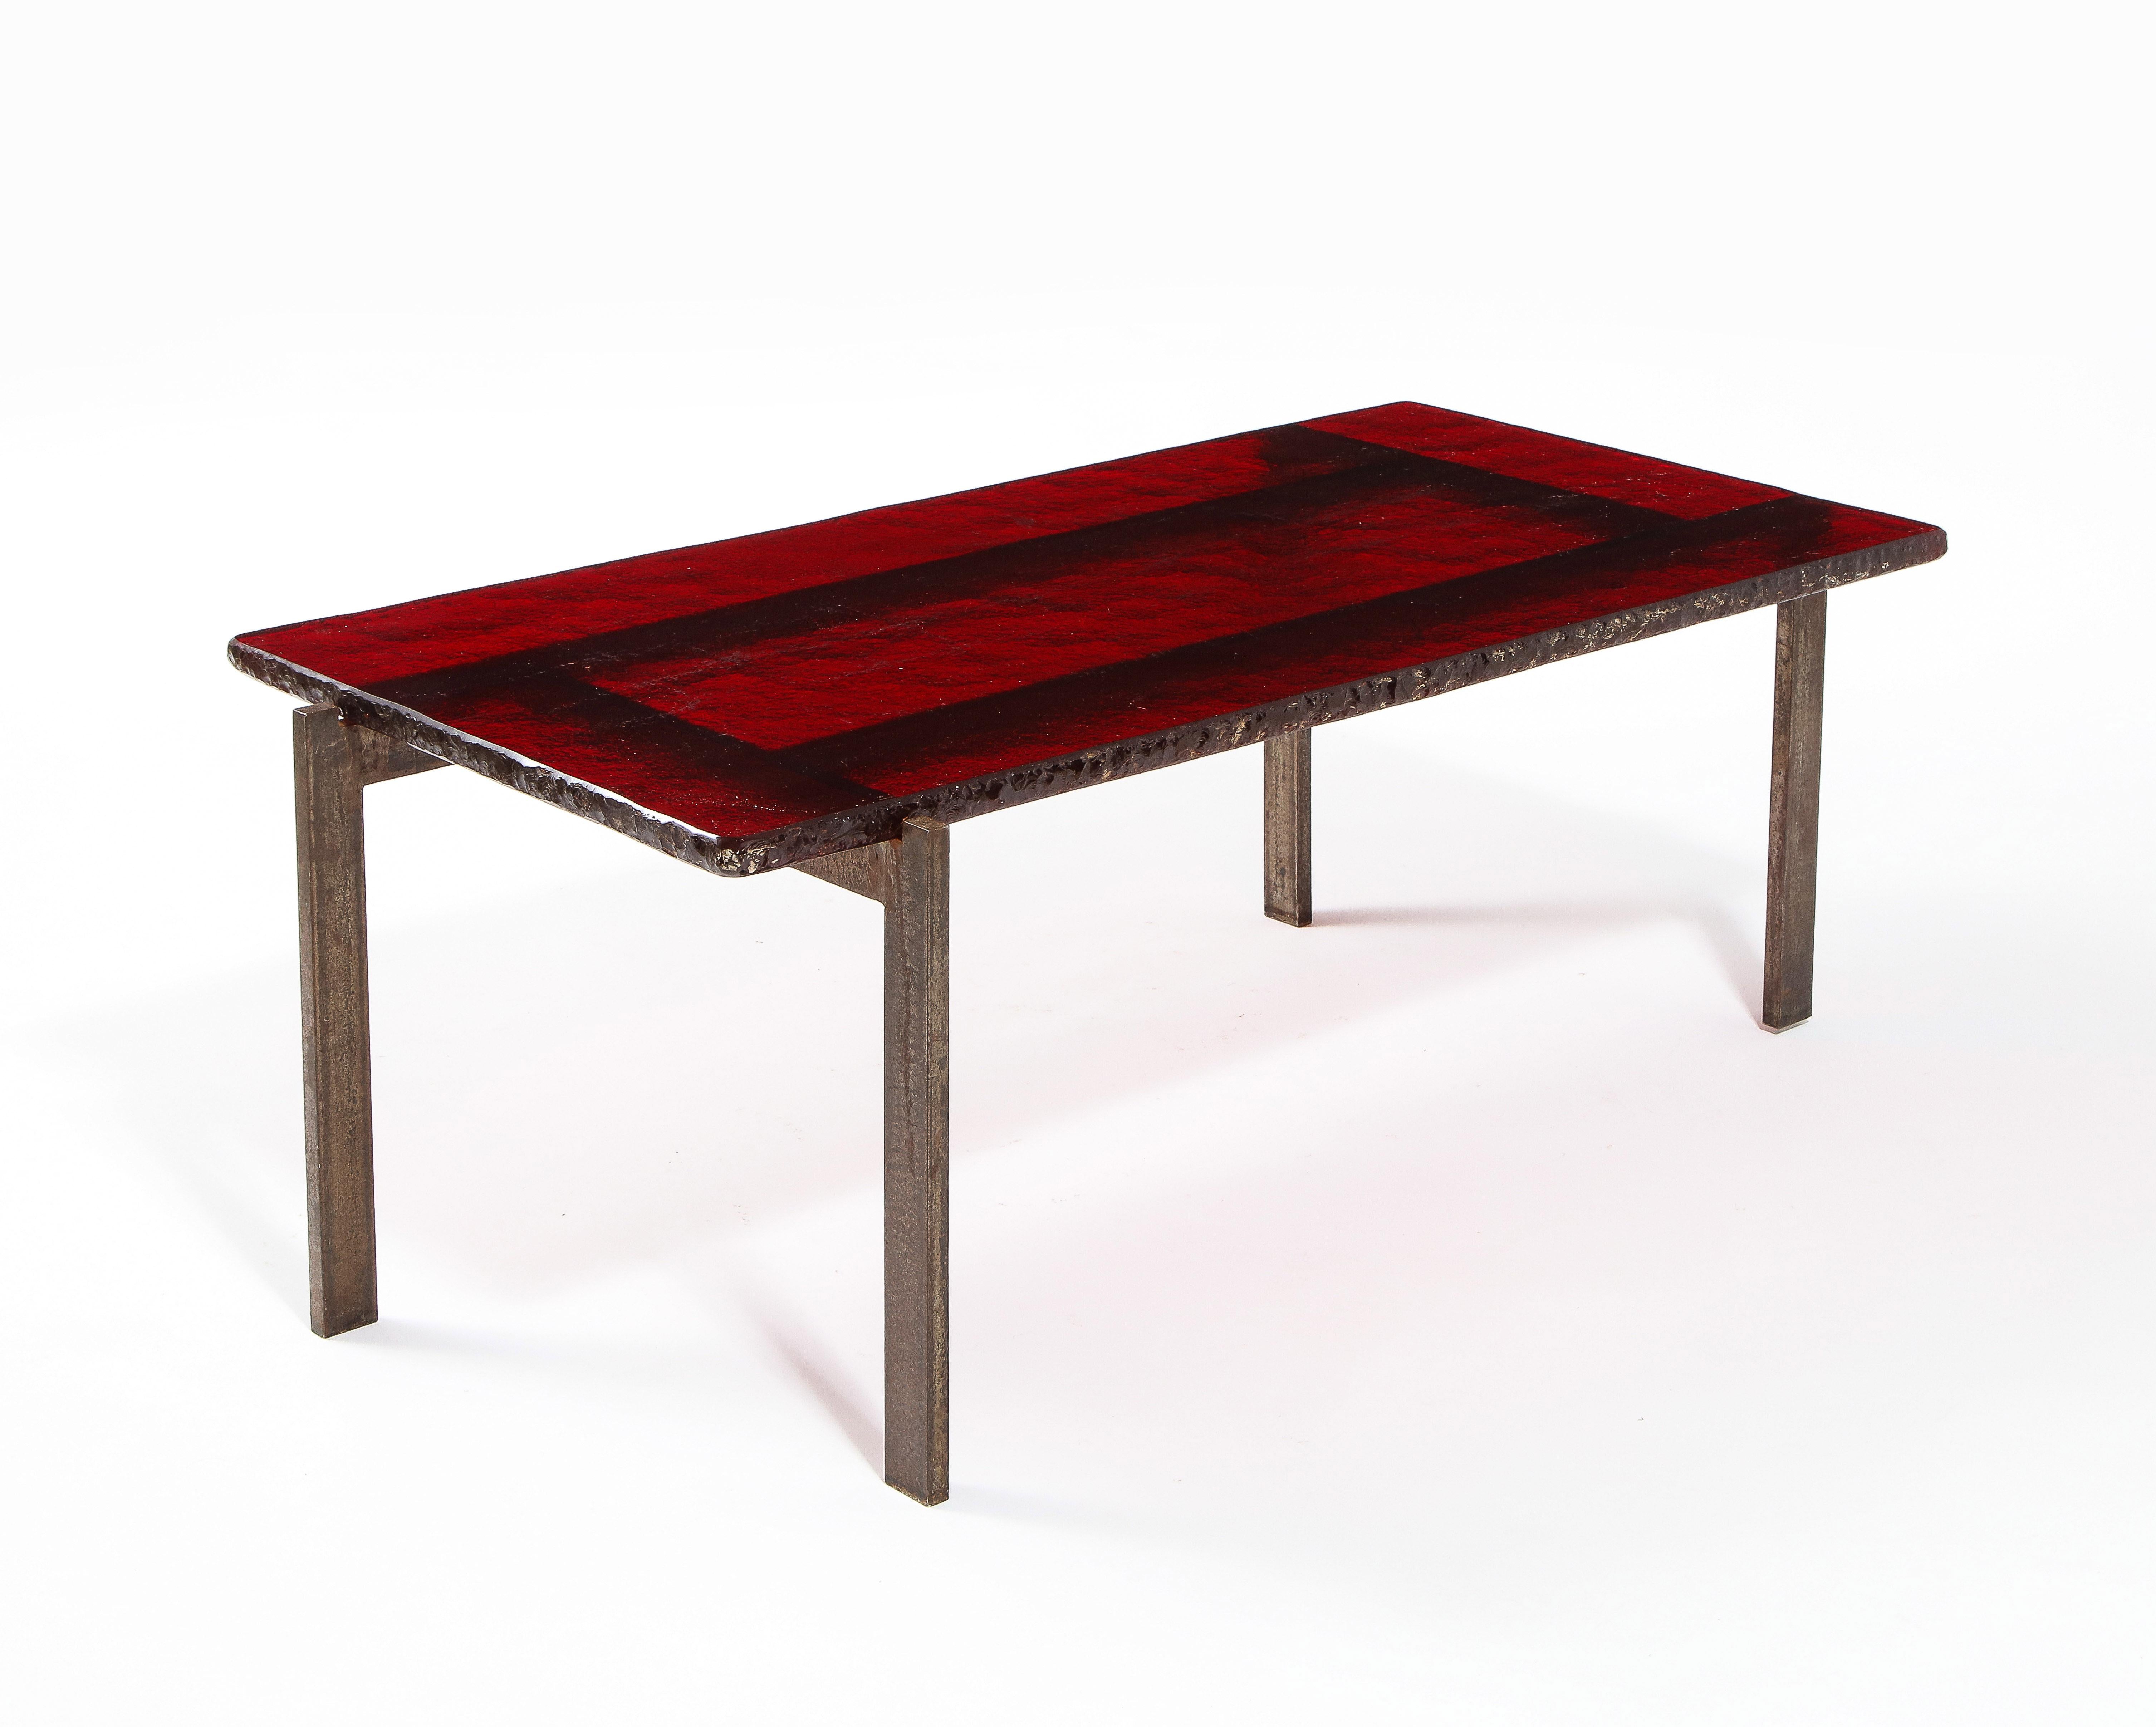 French Ruby Red Saint Gobain Glass & Steel Modernist Coffee Table, France 1960's For Sale